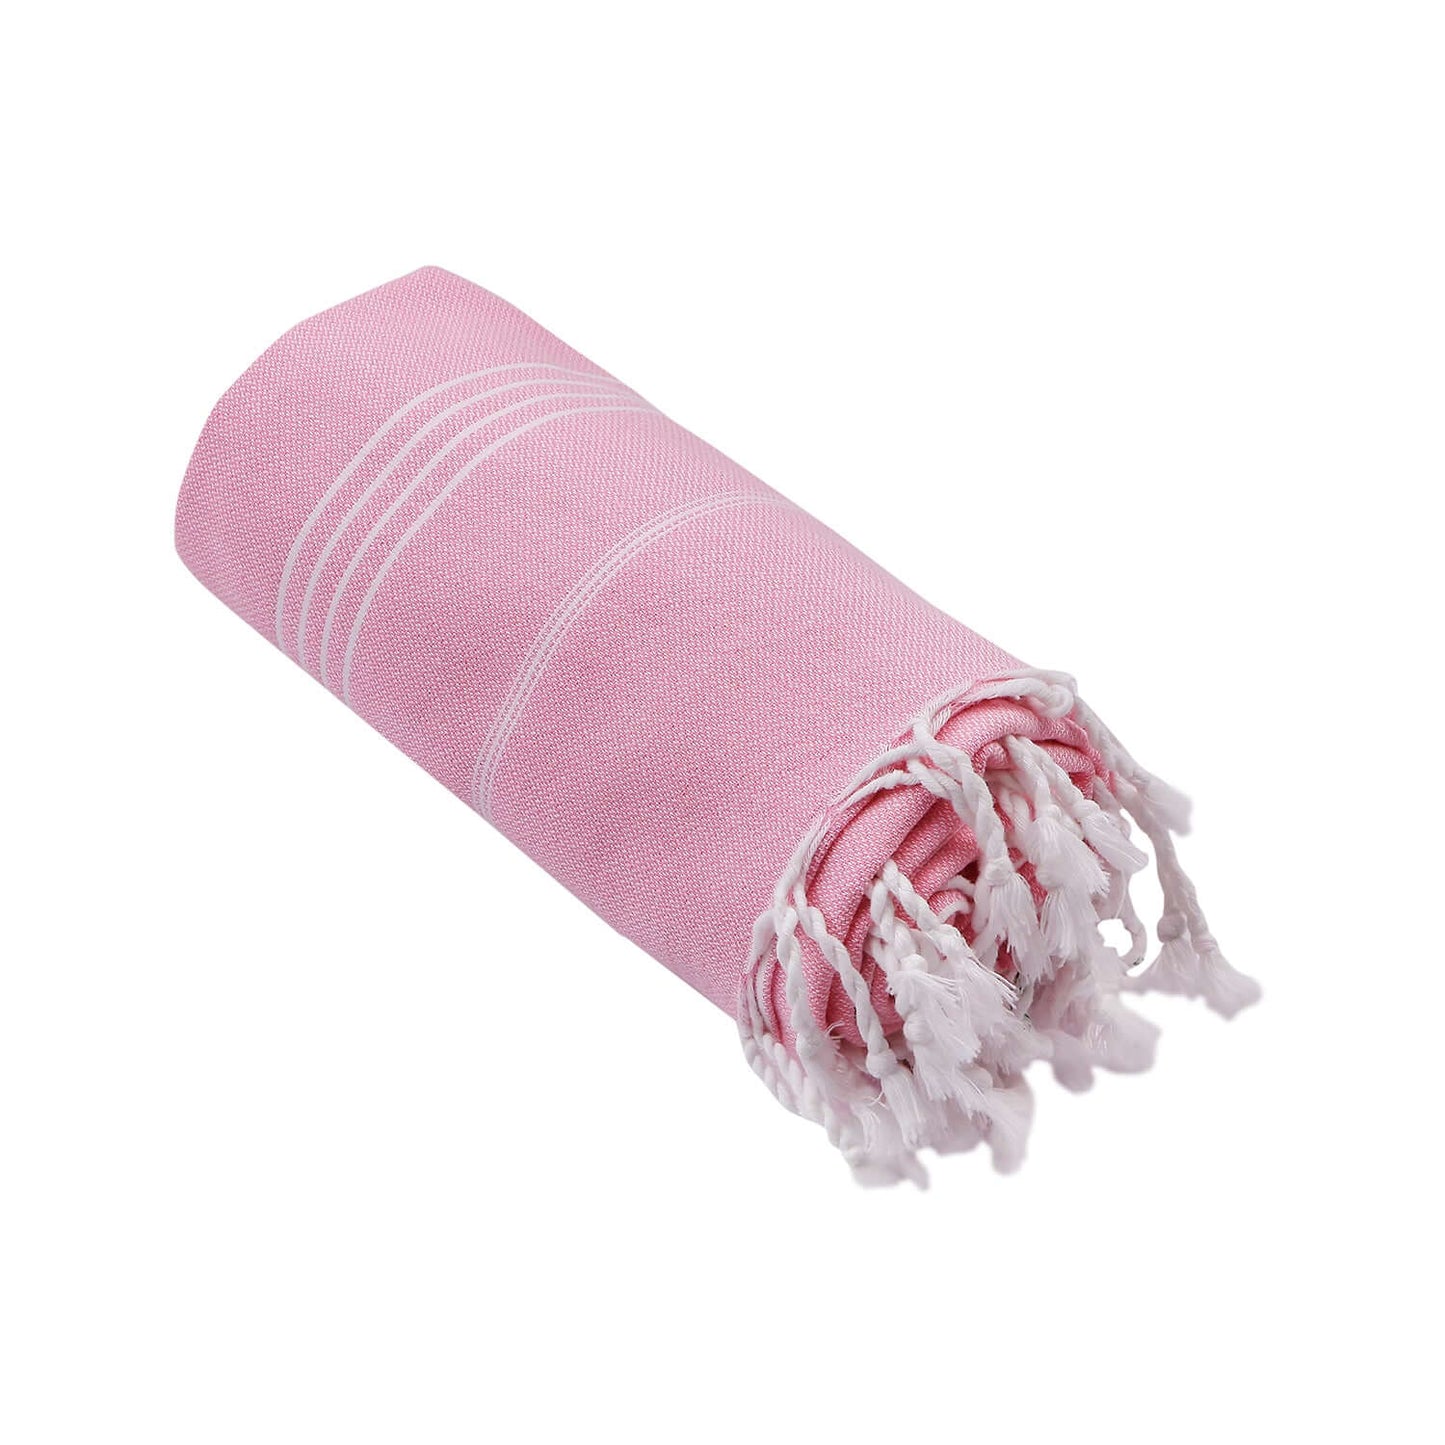 Rolled-up Loom Legacy pink beach towel with subtle white vertical stripes. One end of the towel showcases fringed white tassels, all presented against a white background.